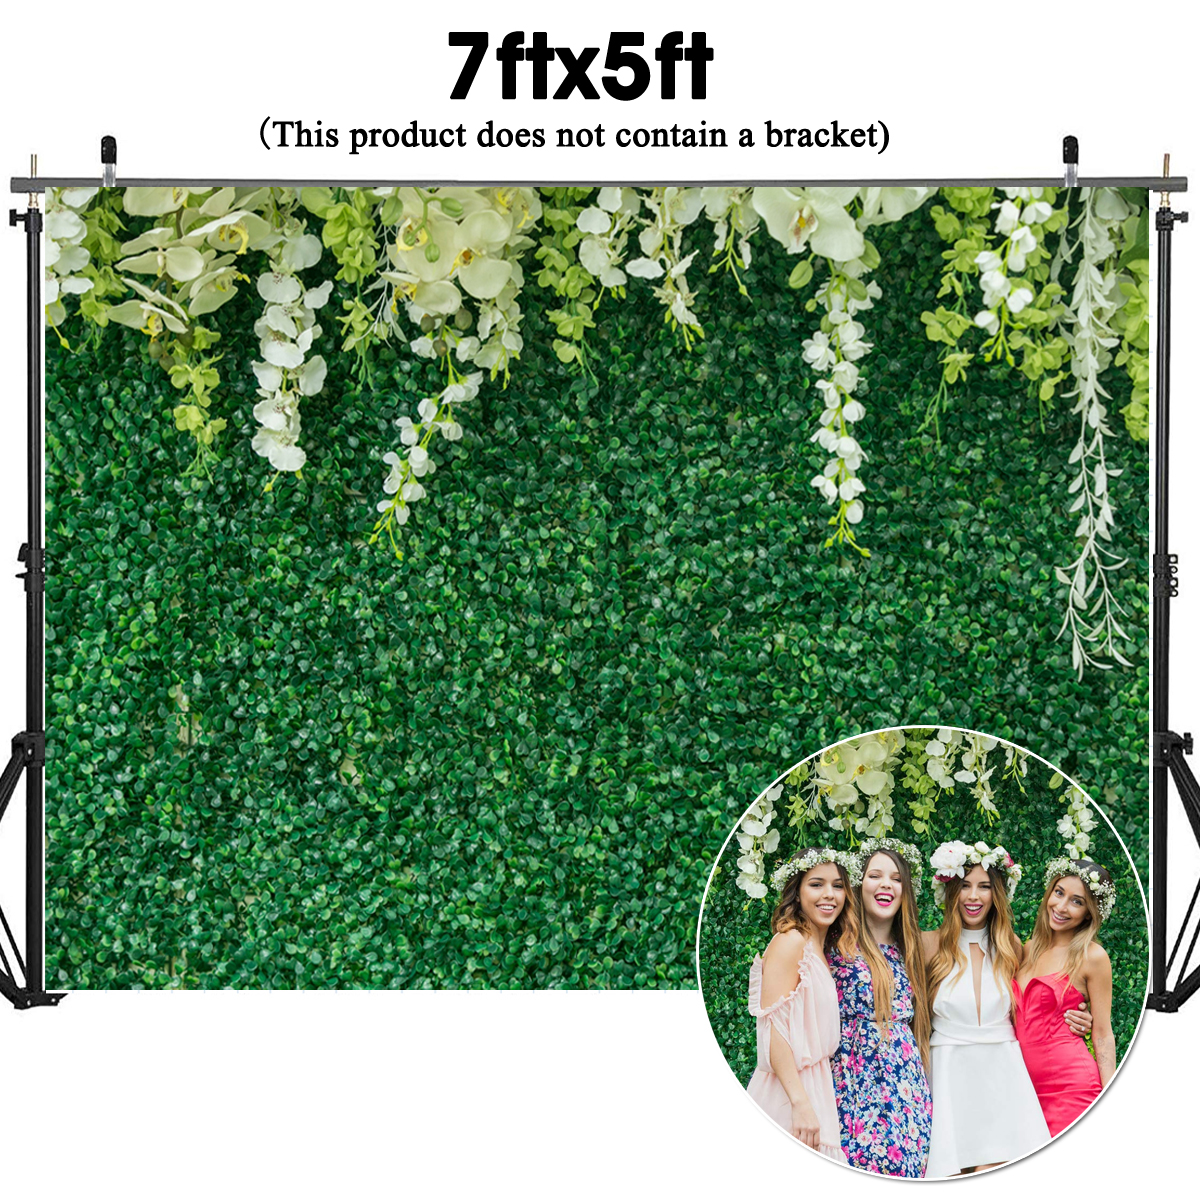 7ftx5ft-White-Flower-Green-Leaves-Photography-Background-Cloth-Backdrops-21x15m-1747745-1